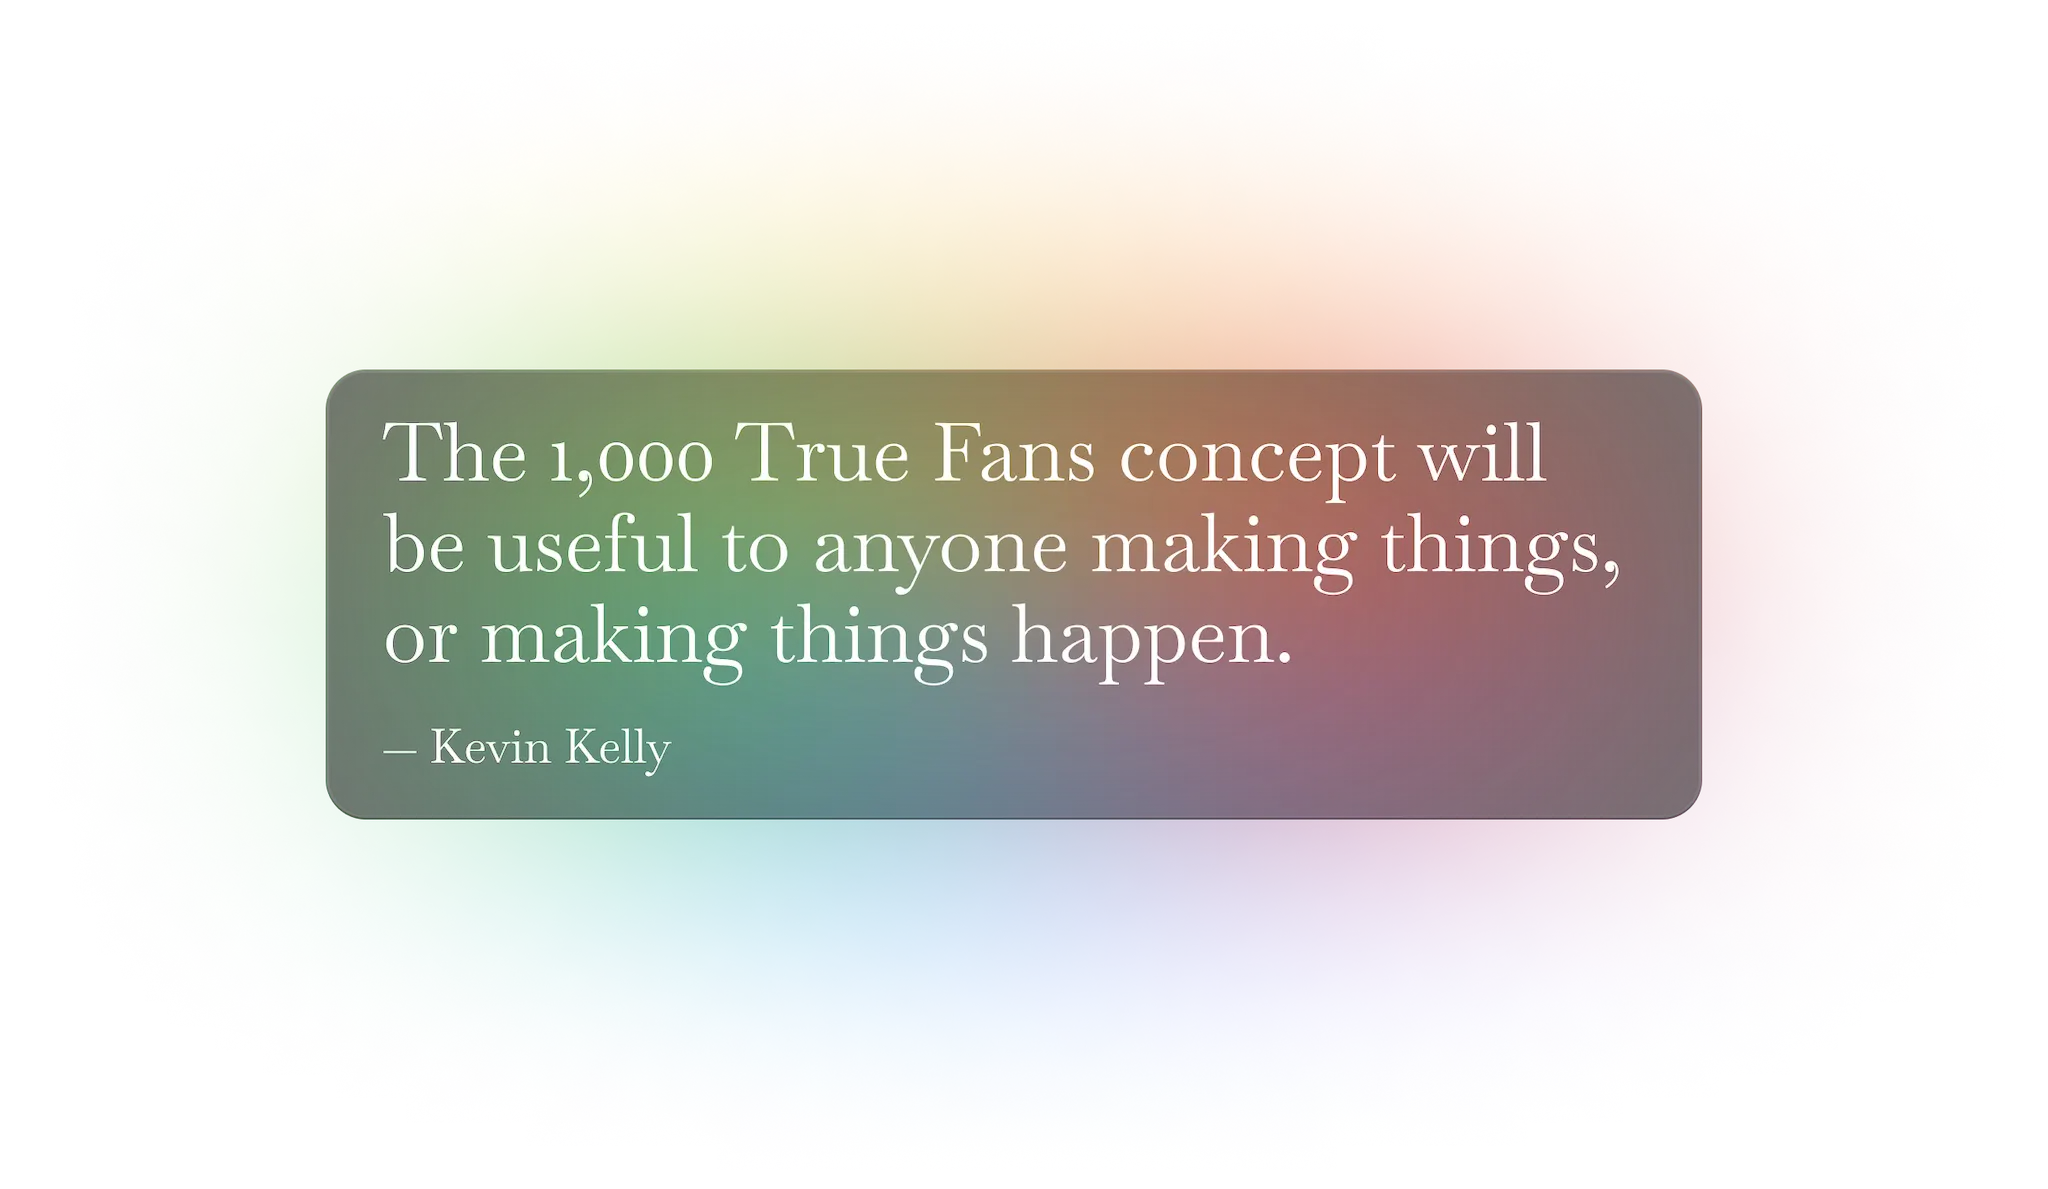 The 1,000 True Fans concept will be useful to anyone making things, or making things happen. —— Kevin Kelly